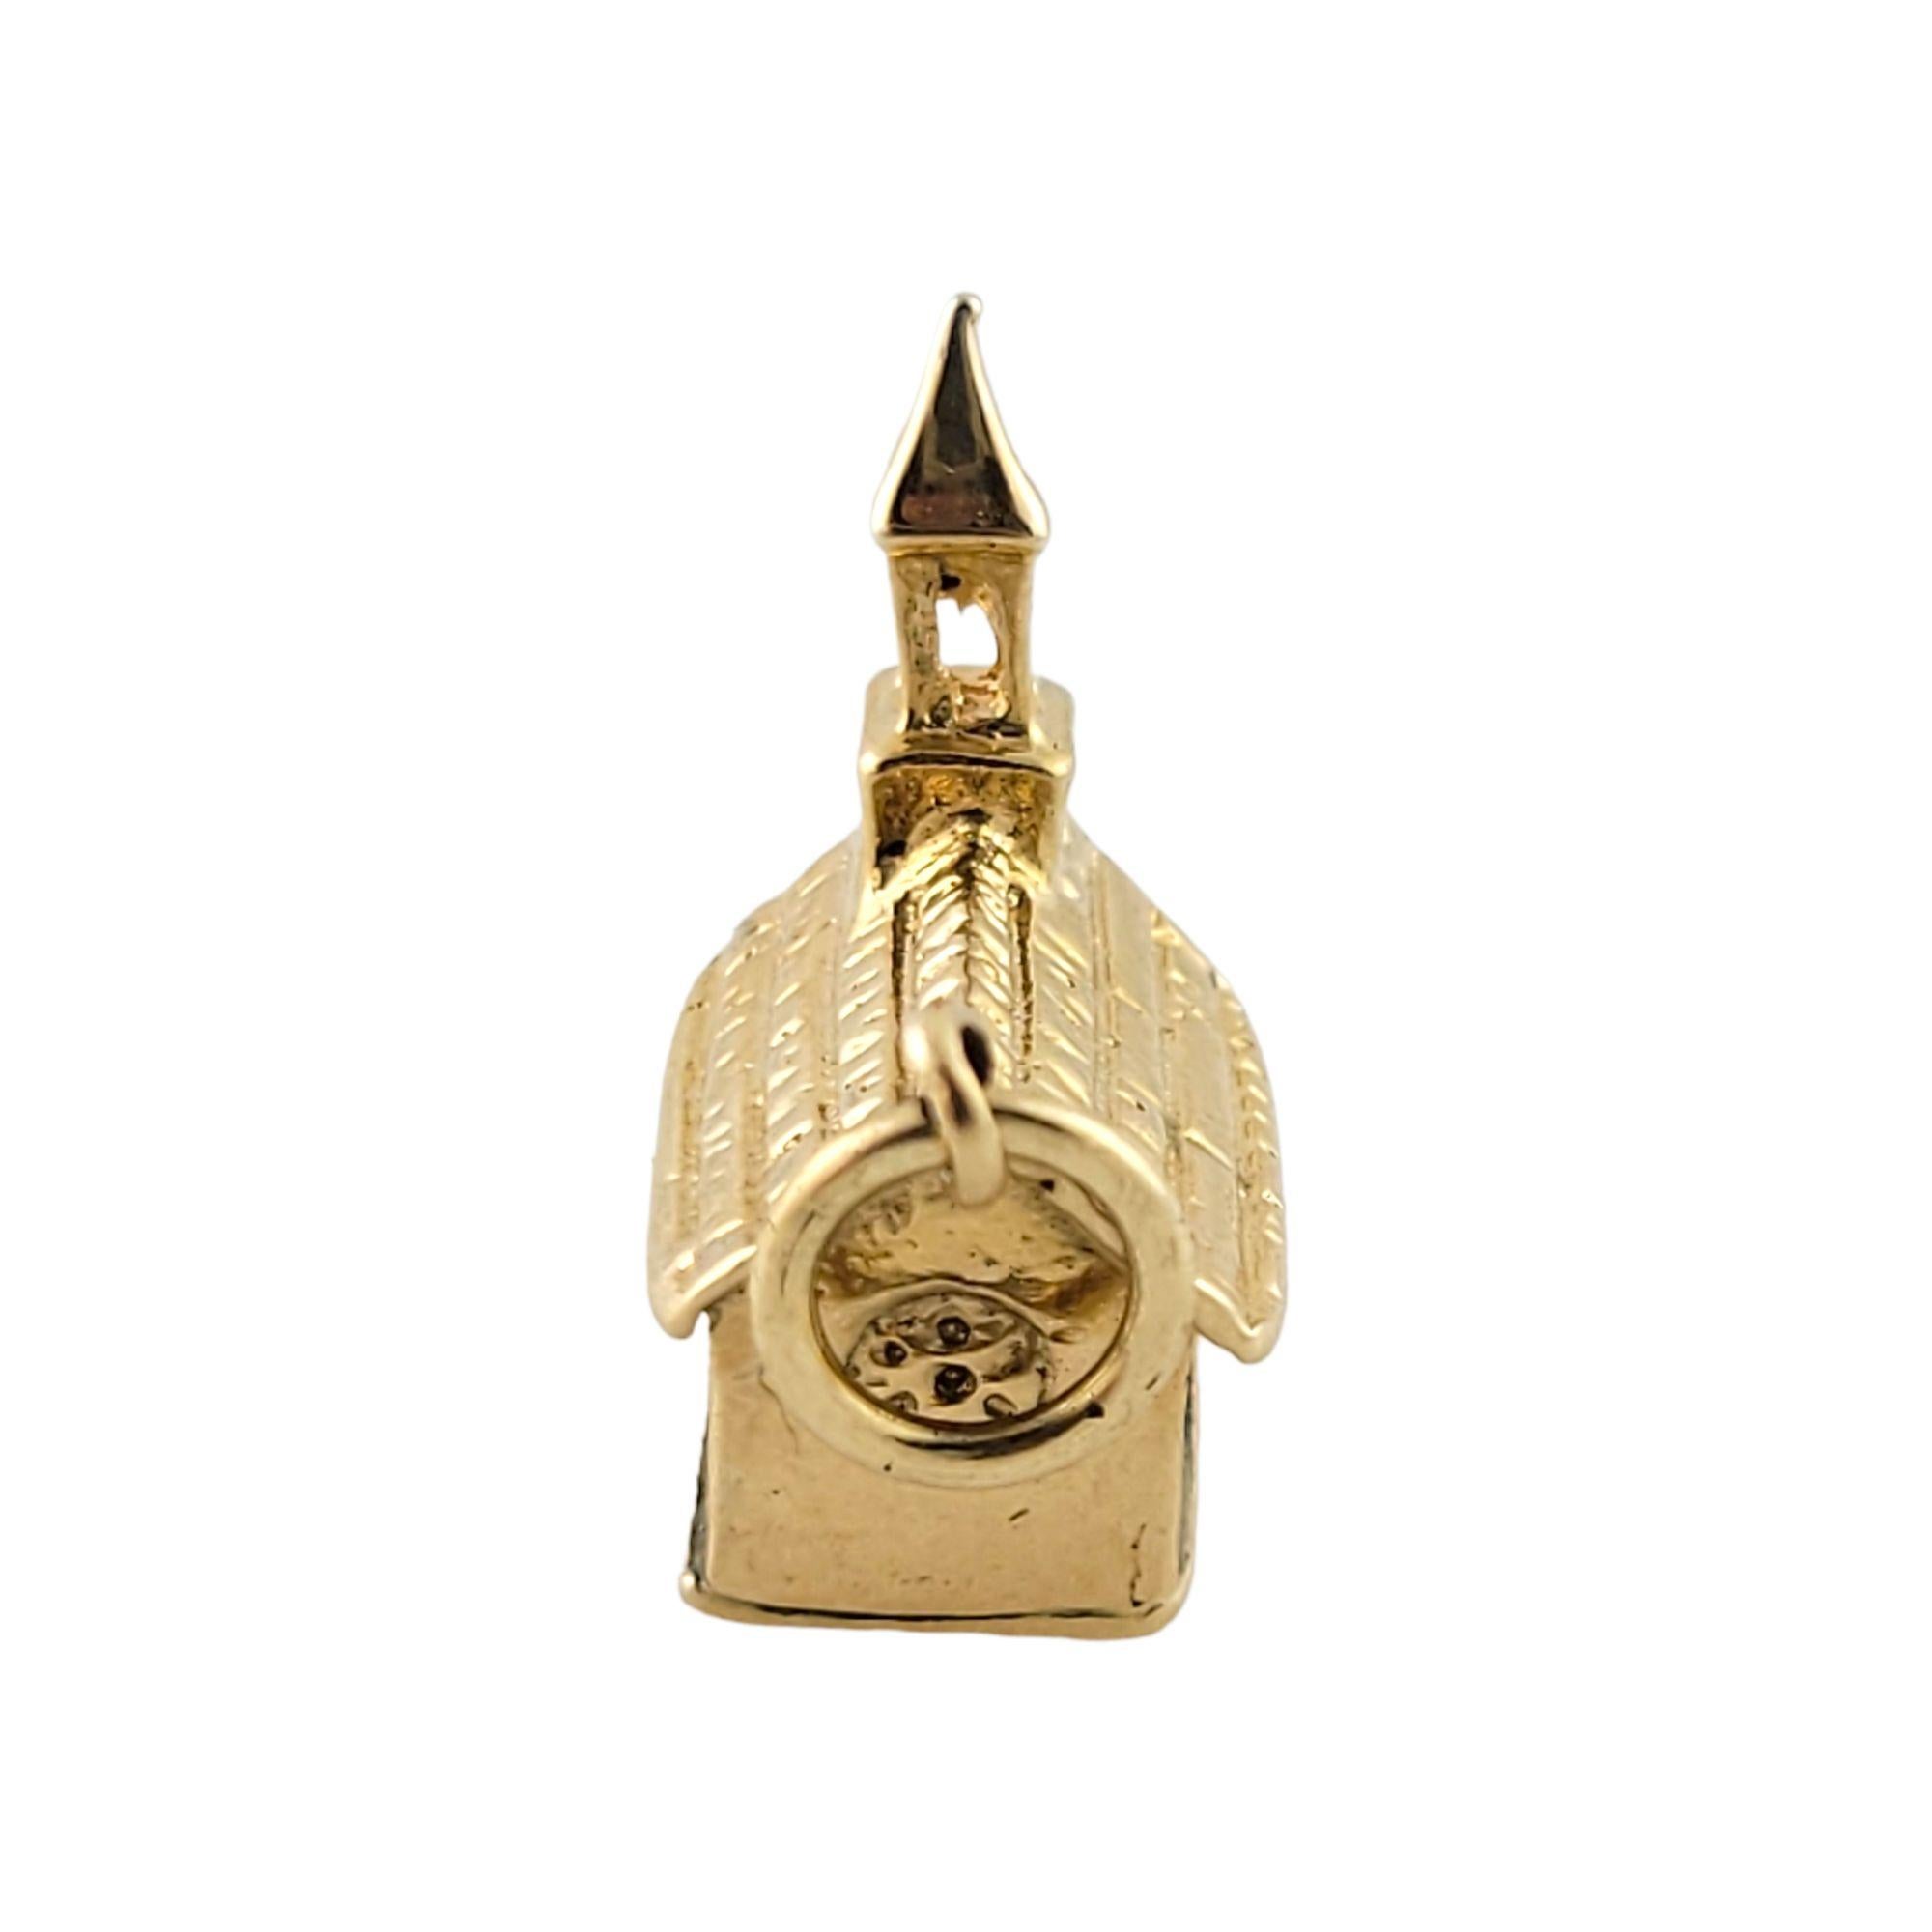 Vintage 14K Yellow Gold Church Charm Pendant

This 14K yellow gold charm depicts a beautiful church!

Size: 13mm X 9mm X 16mm

Weight: 3.5 gr/ 2.2 dwt

Tested 14K

Very good condition, professionally polished.

Will come packaged in a gift box or